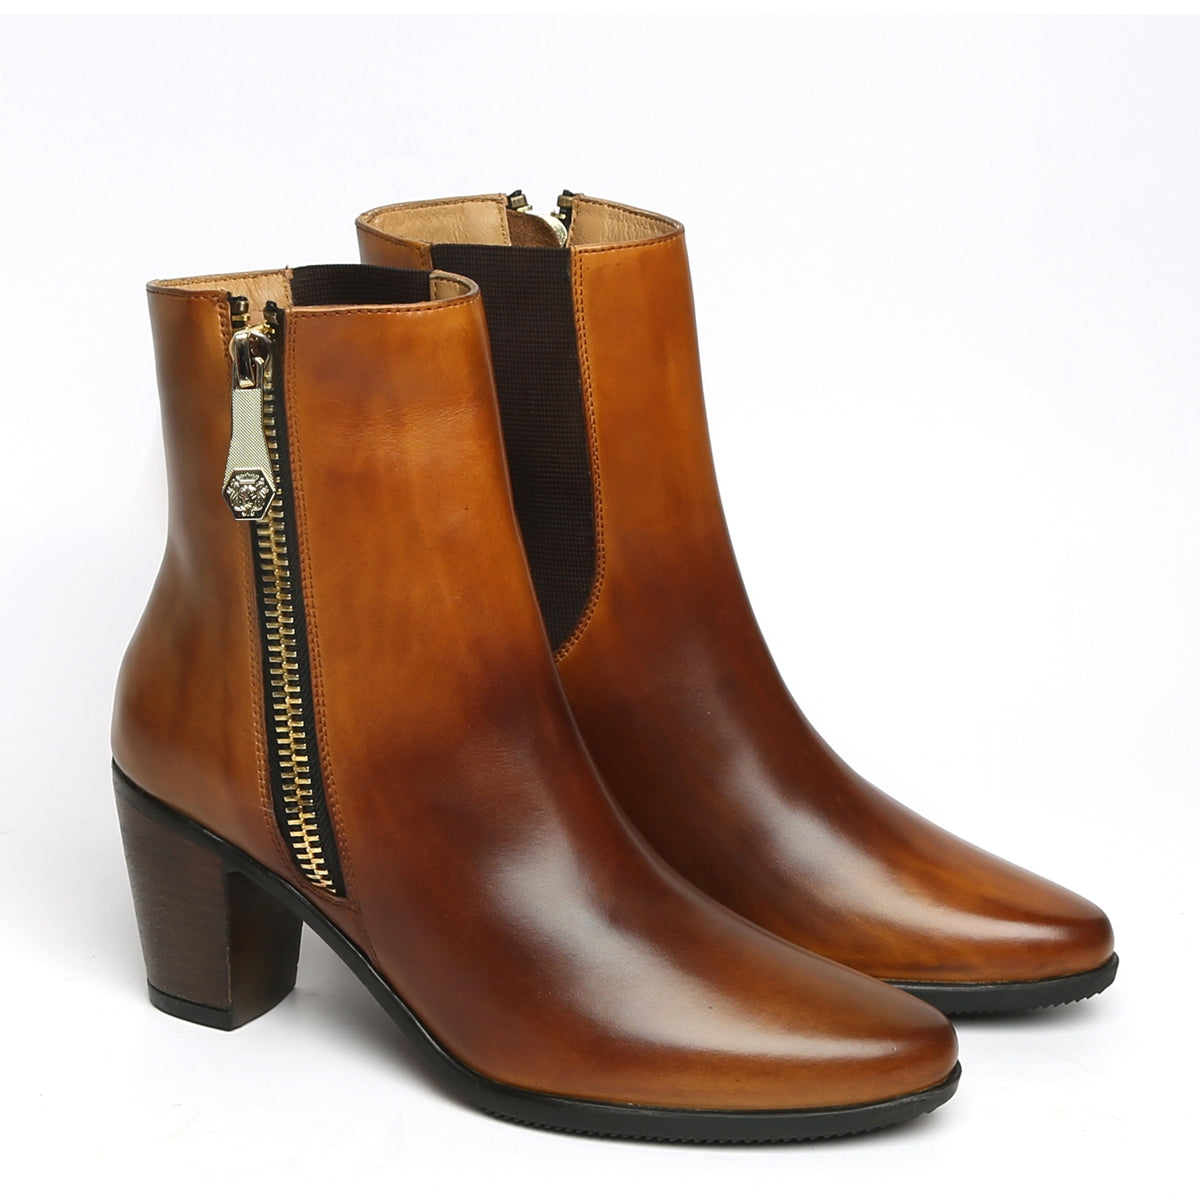 Smudged Tan Dual Tone Leather Boots By Brune & Bareskin